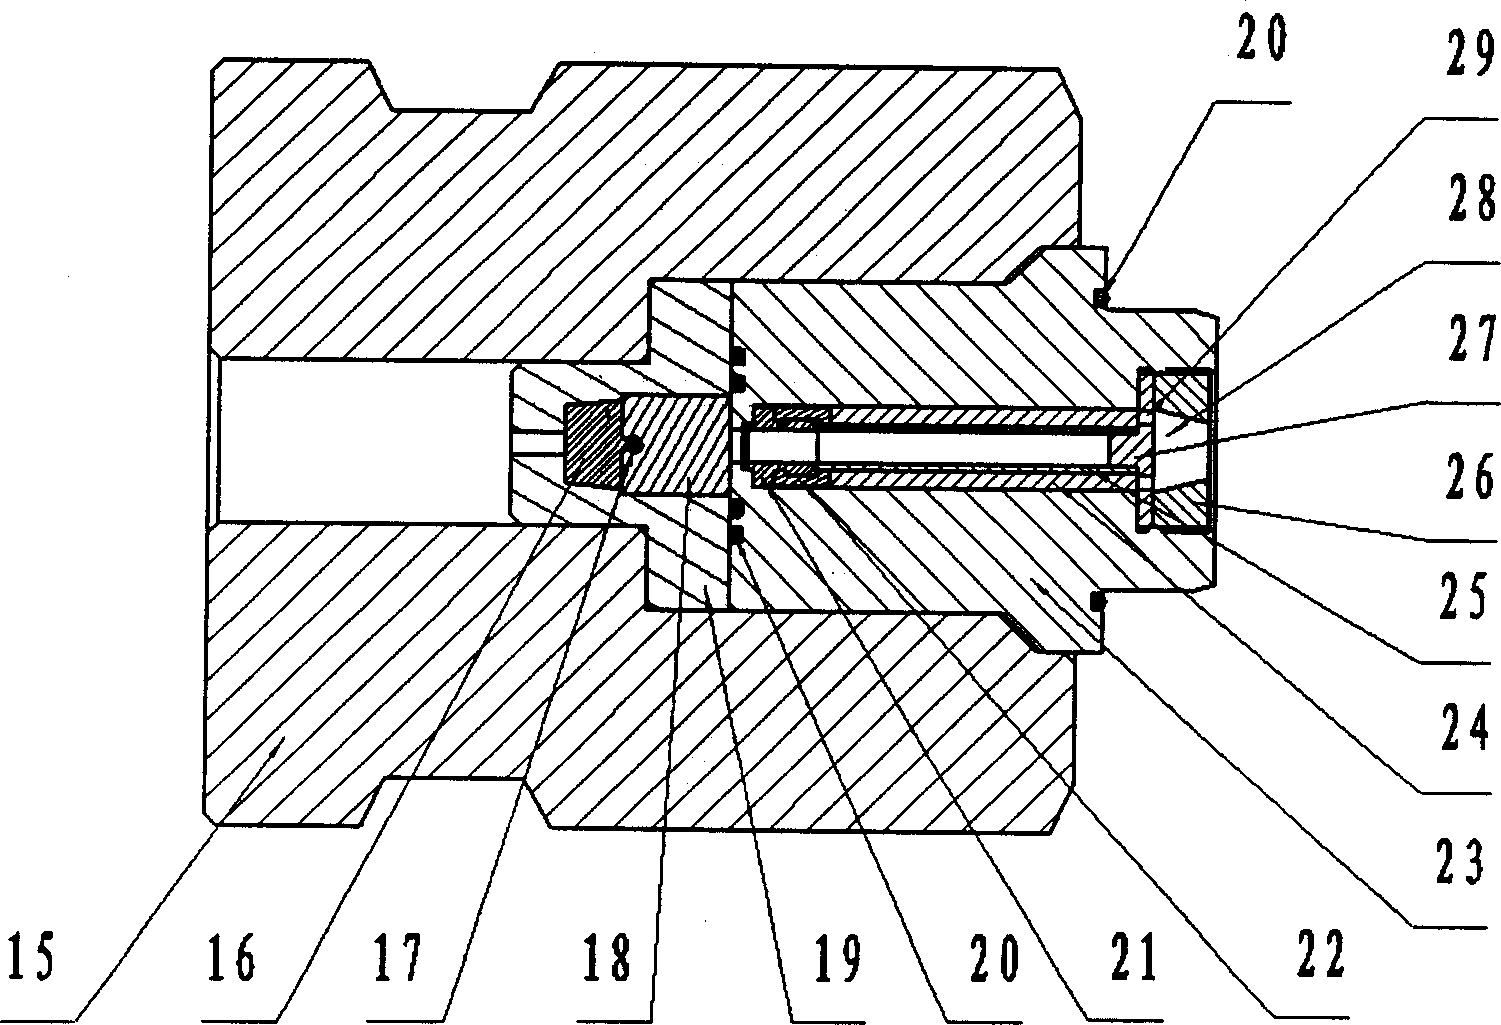 Device for testing deflagrability of condensed fire detonator under condition of high termerature and high pressure